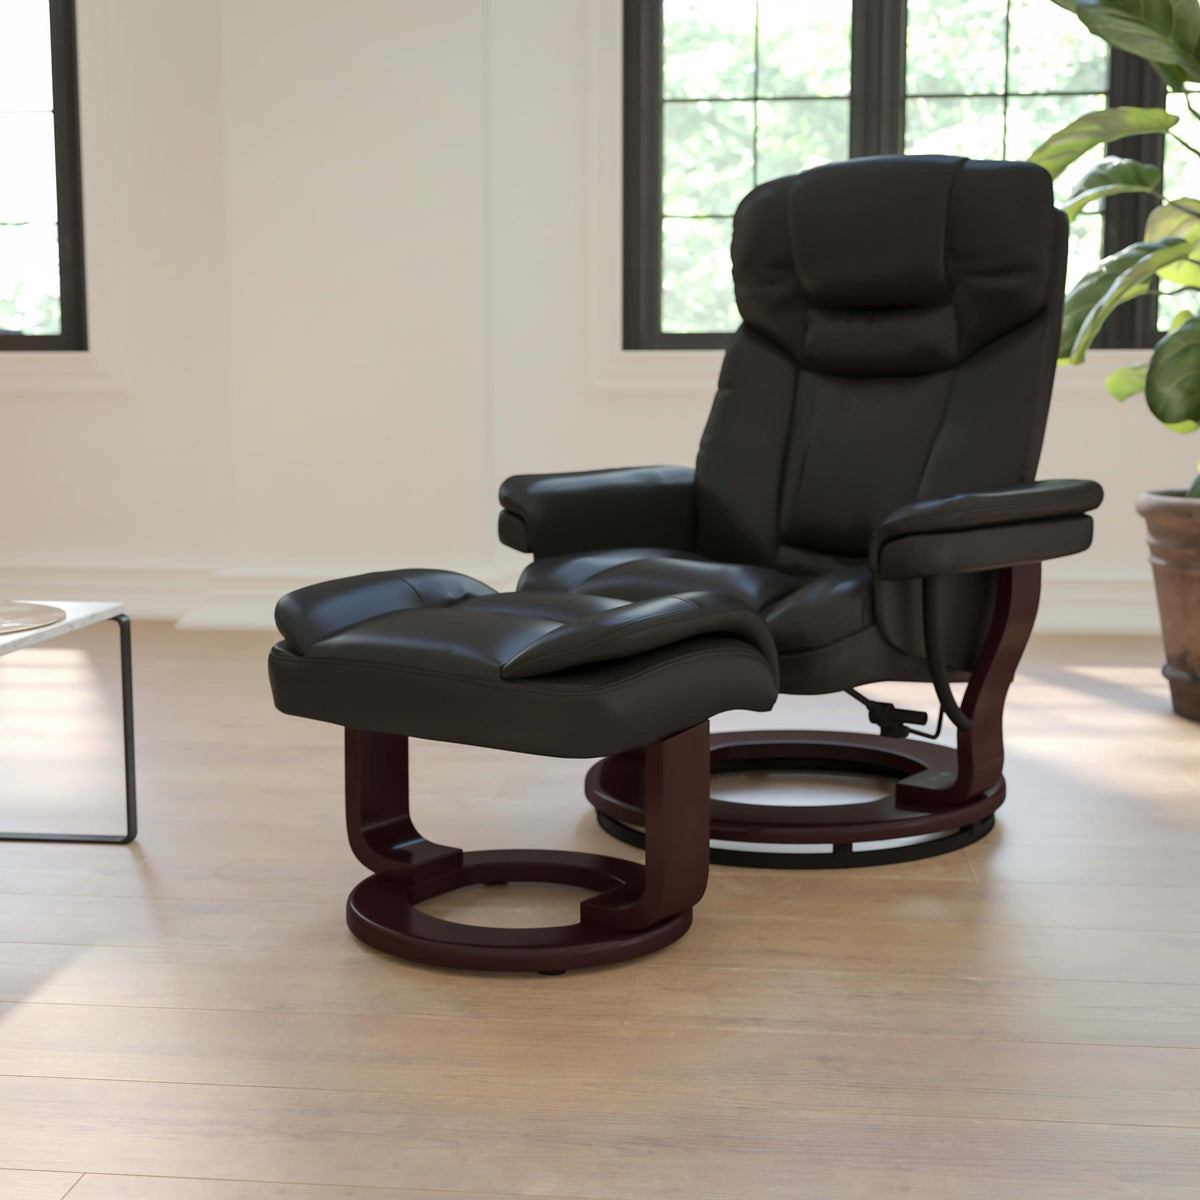 Black |#| Black LeatherSoft Multi-Position Recliner &Curved Ottoman w/Mahogany Wood Base